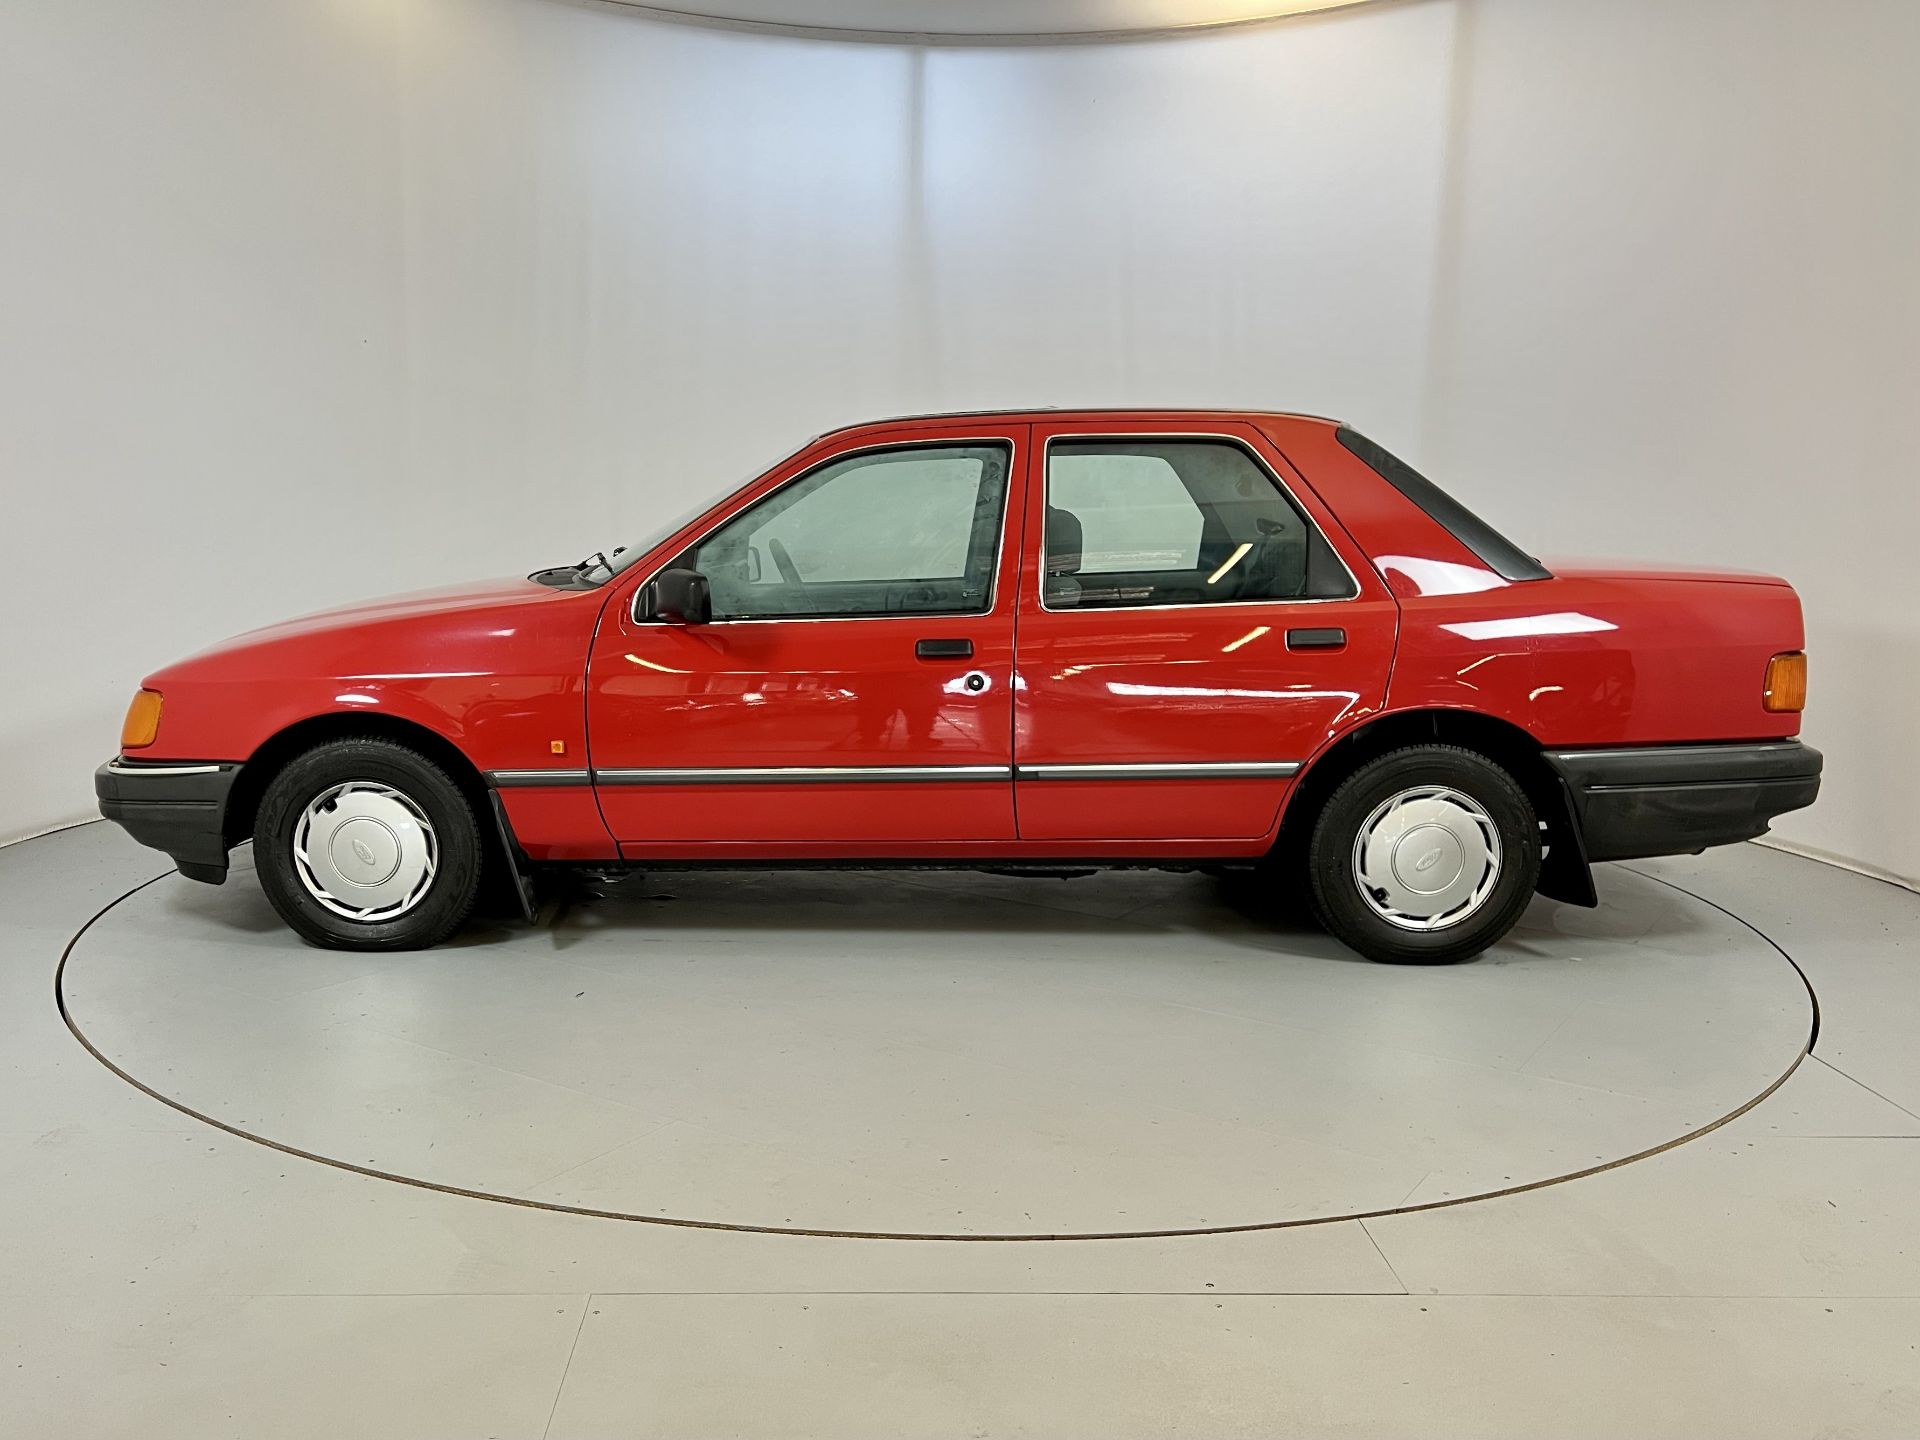 Ford Sierra Sapphire - Image 5 of 34